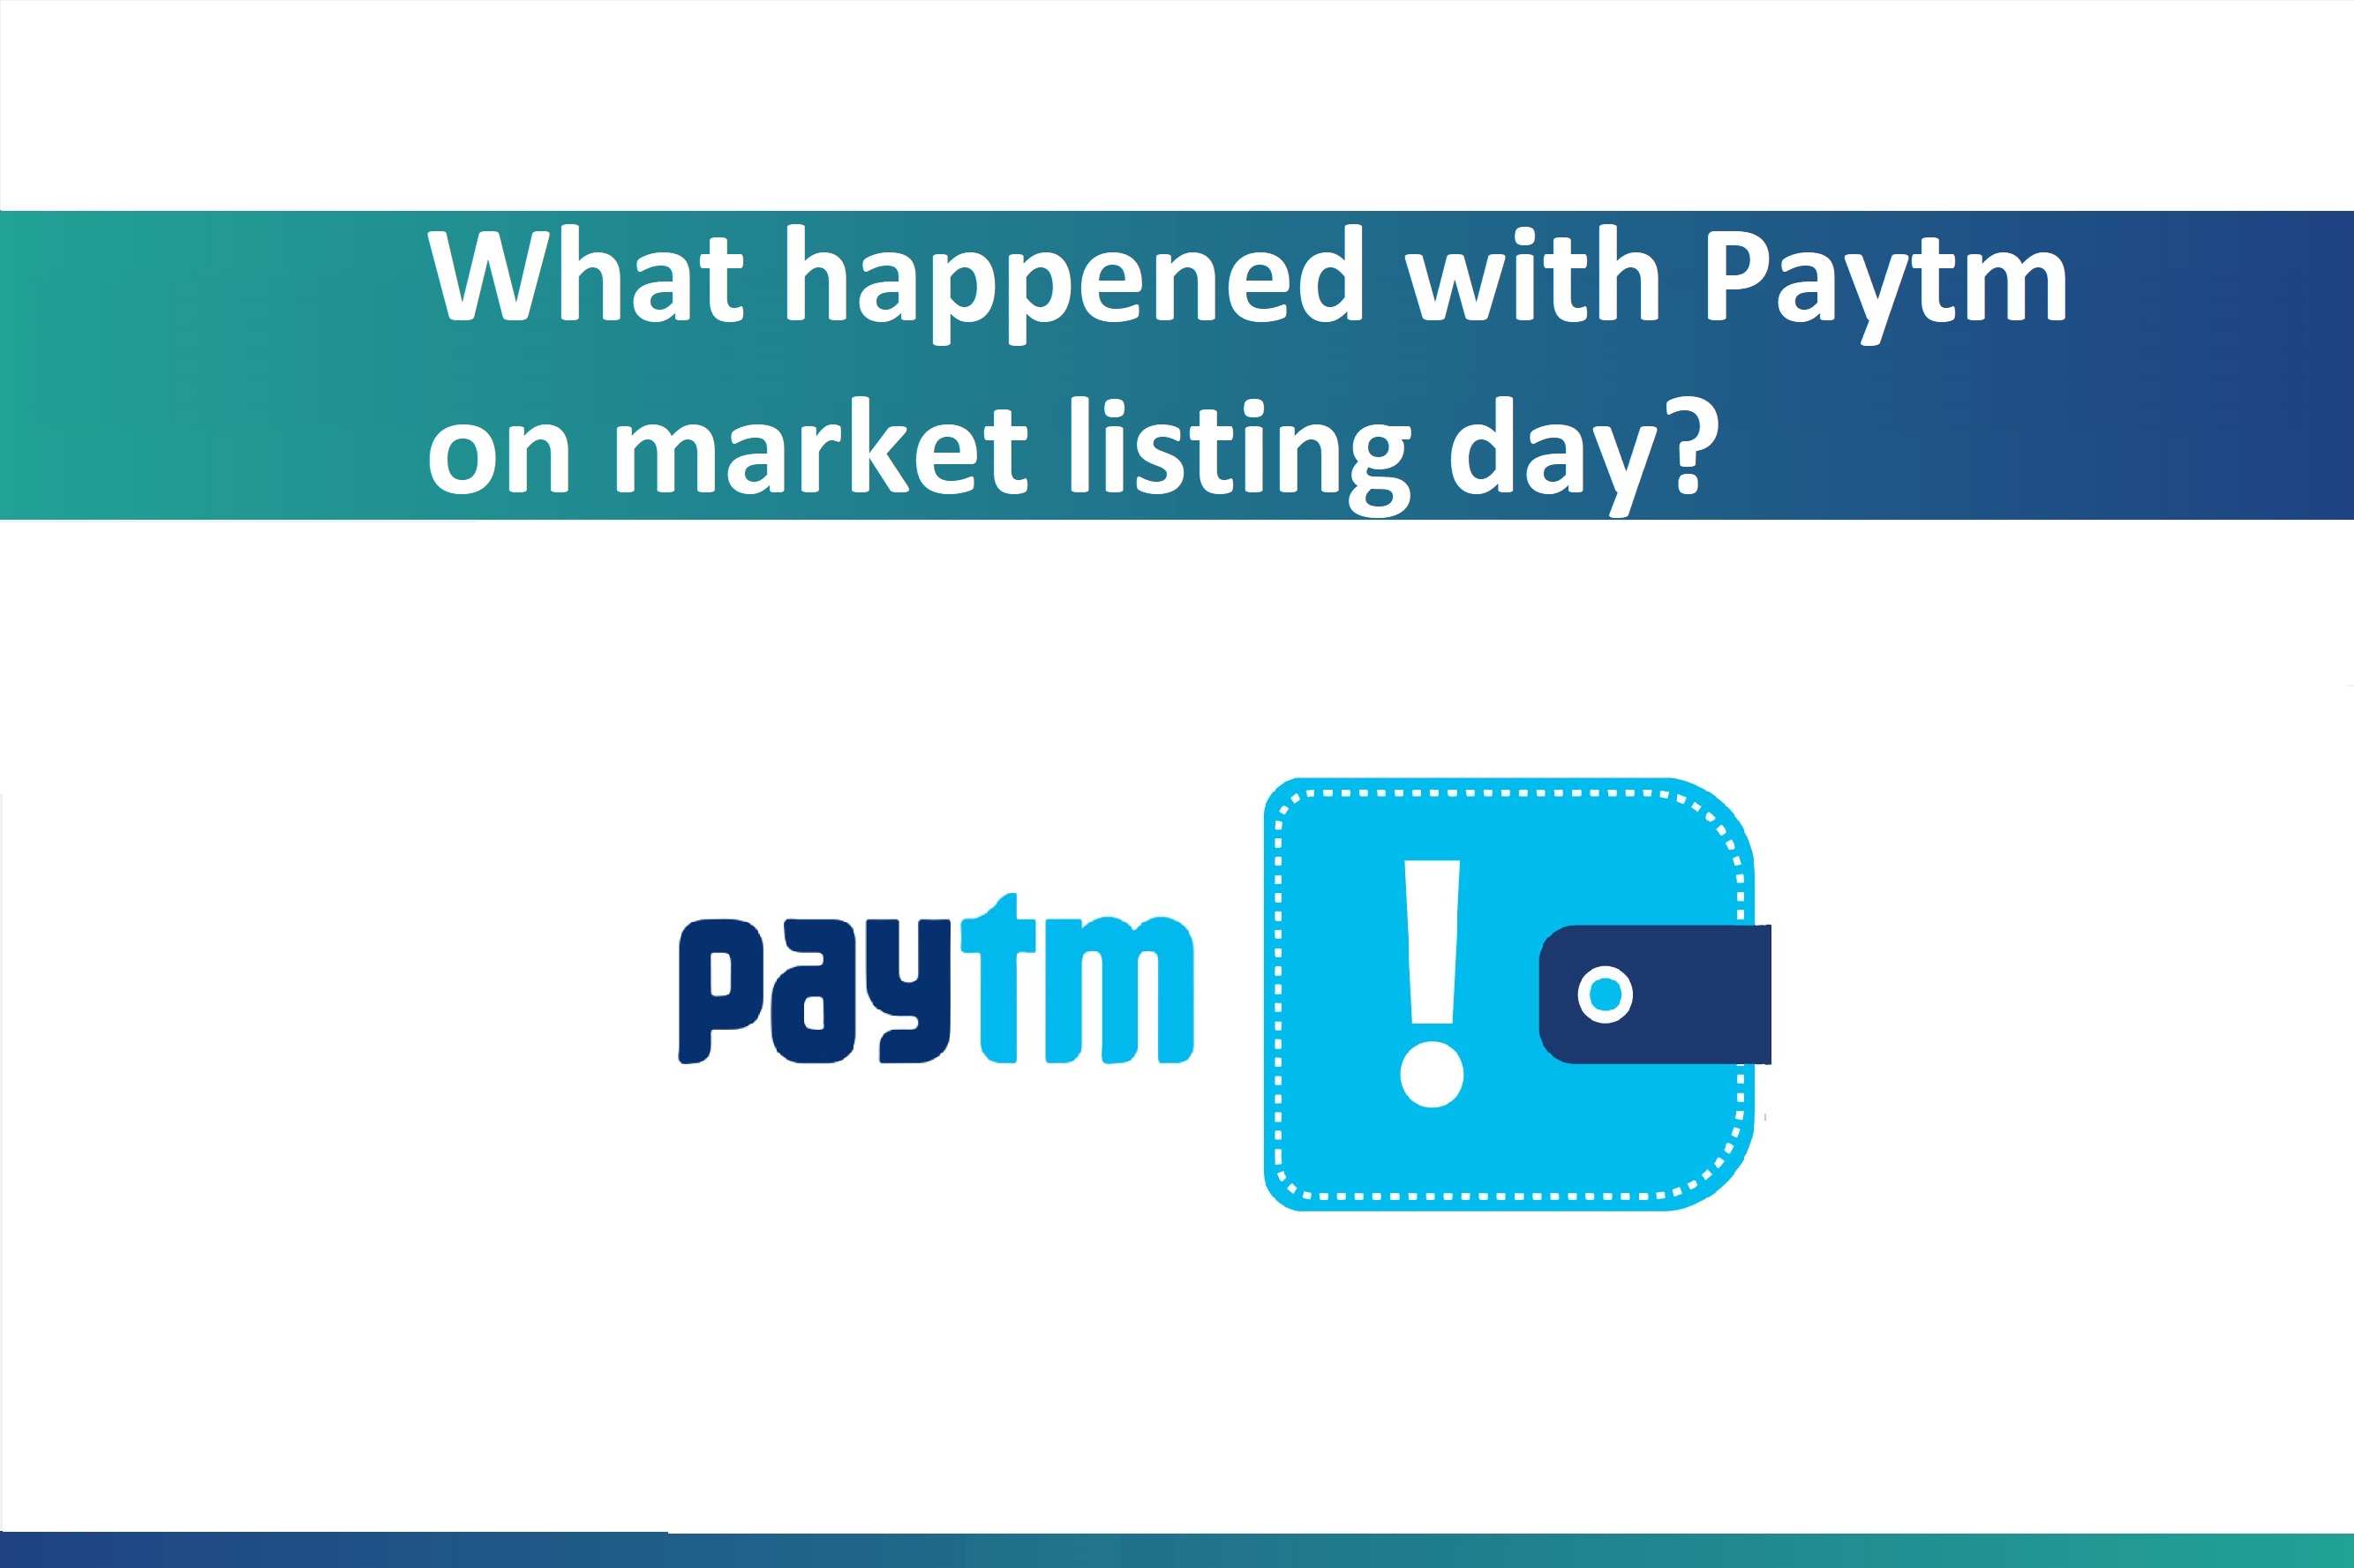 What happened with Paytm on market listing day?